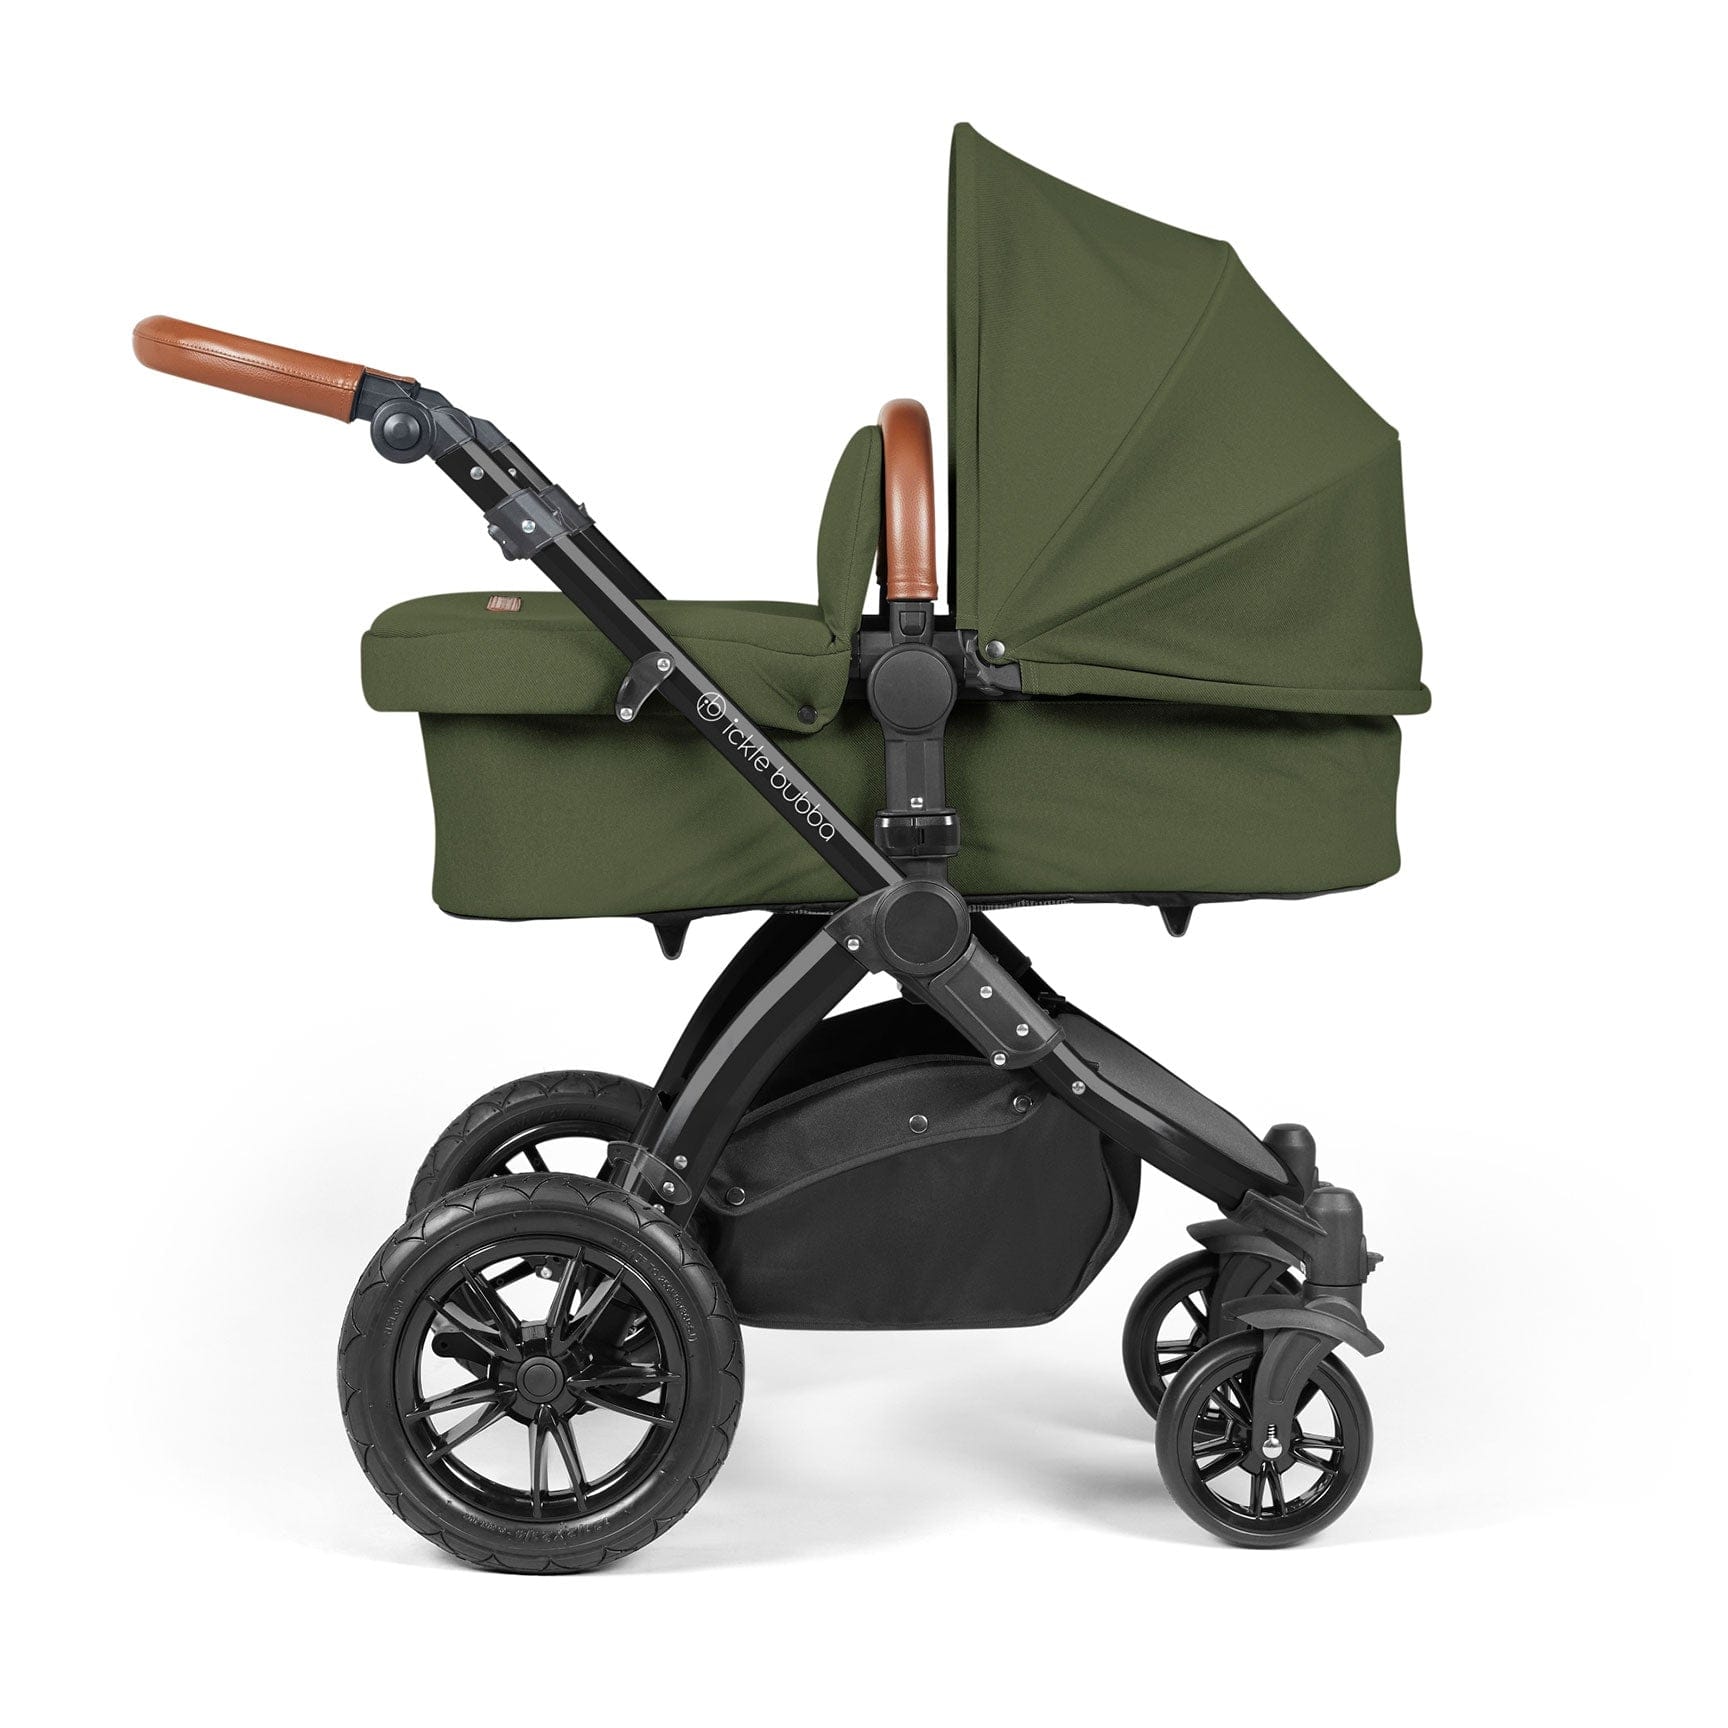 Ickle Bubba travel systems Ickle Bubba Stomp Luxe 2 in 1 Plus Pushchair & Carrycot - Black/Woodland/Tan 10-003-001-137